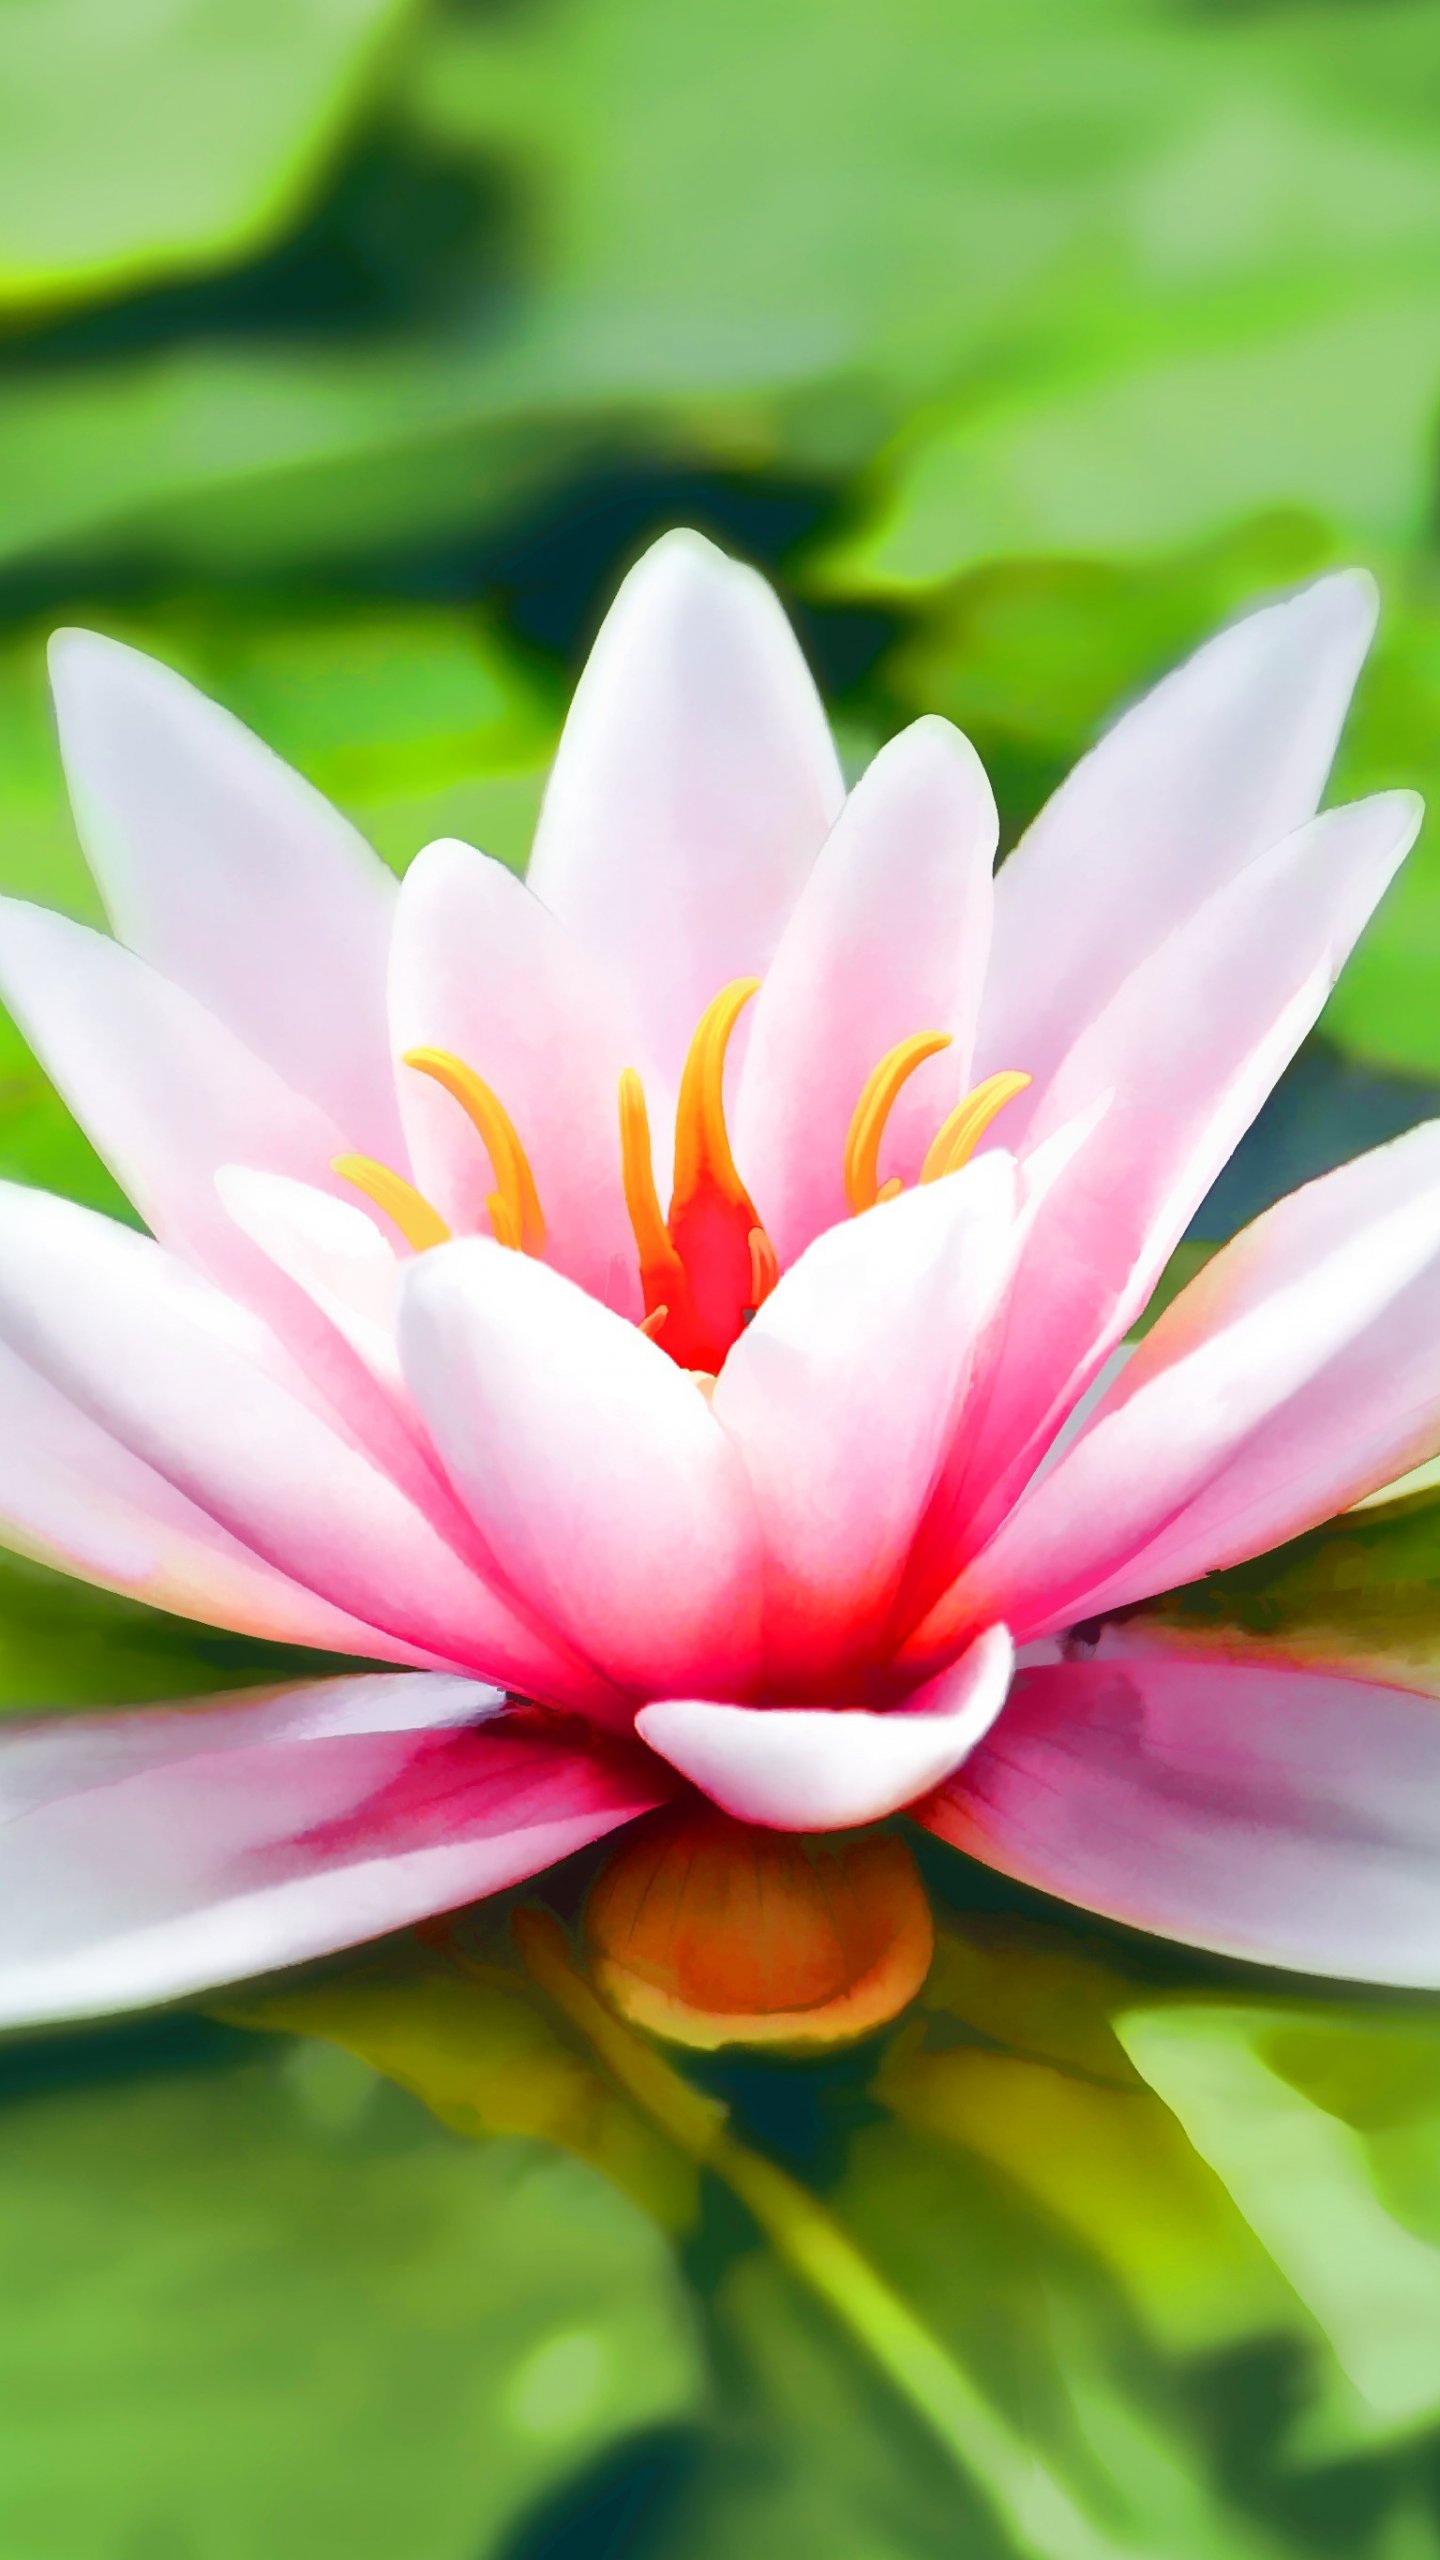 water lily wallpaper,petal,fragrant white water lily,flower,aquatic plant,sacred lotus